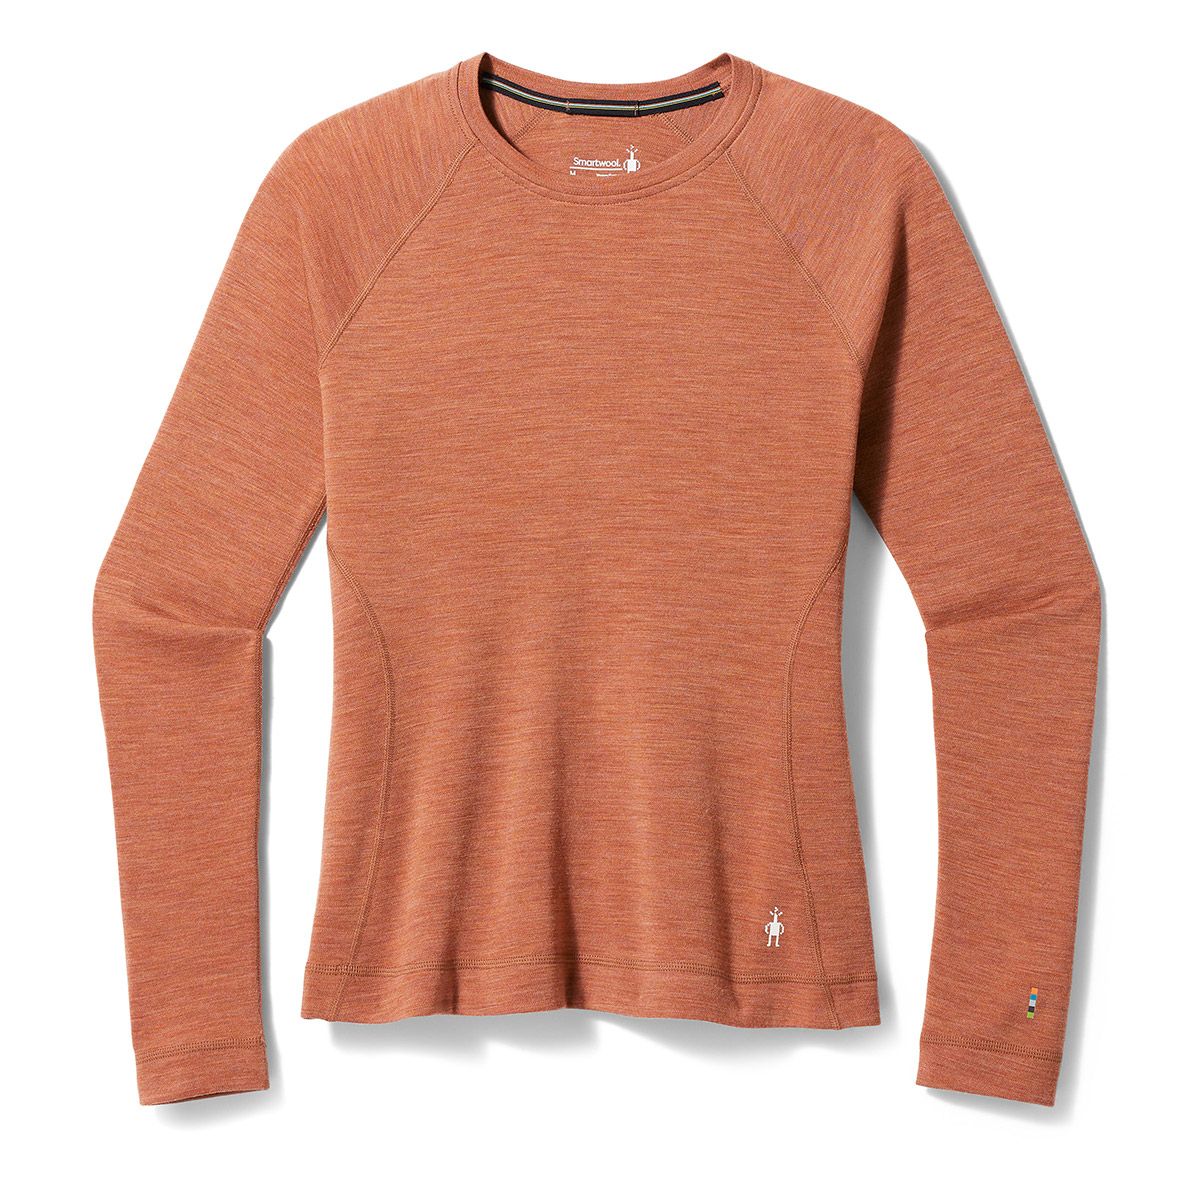 Smartwool - Women's Classic Thermal Merino Base Layer Crew (3 Colours)